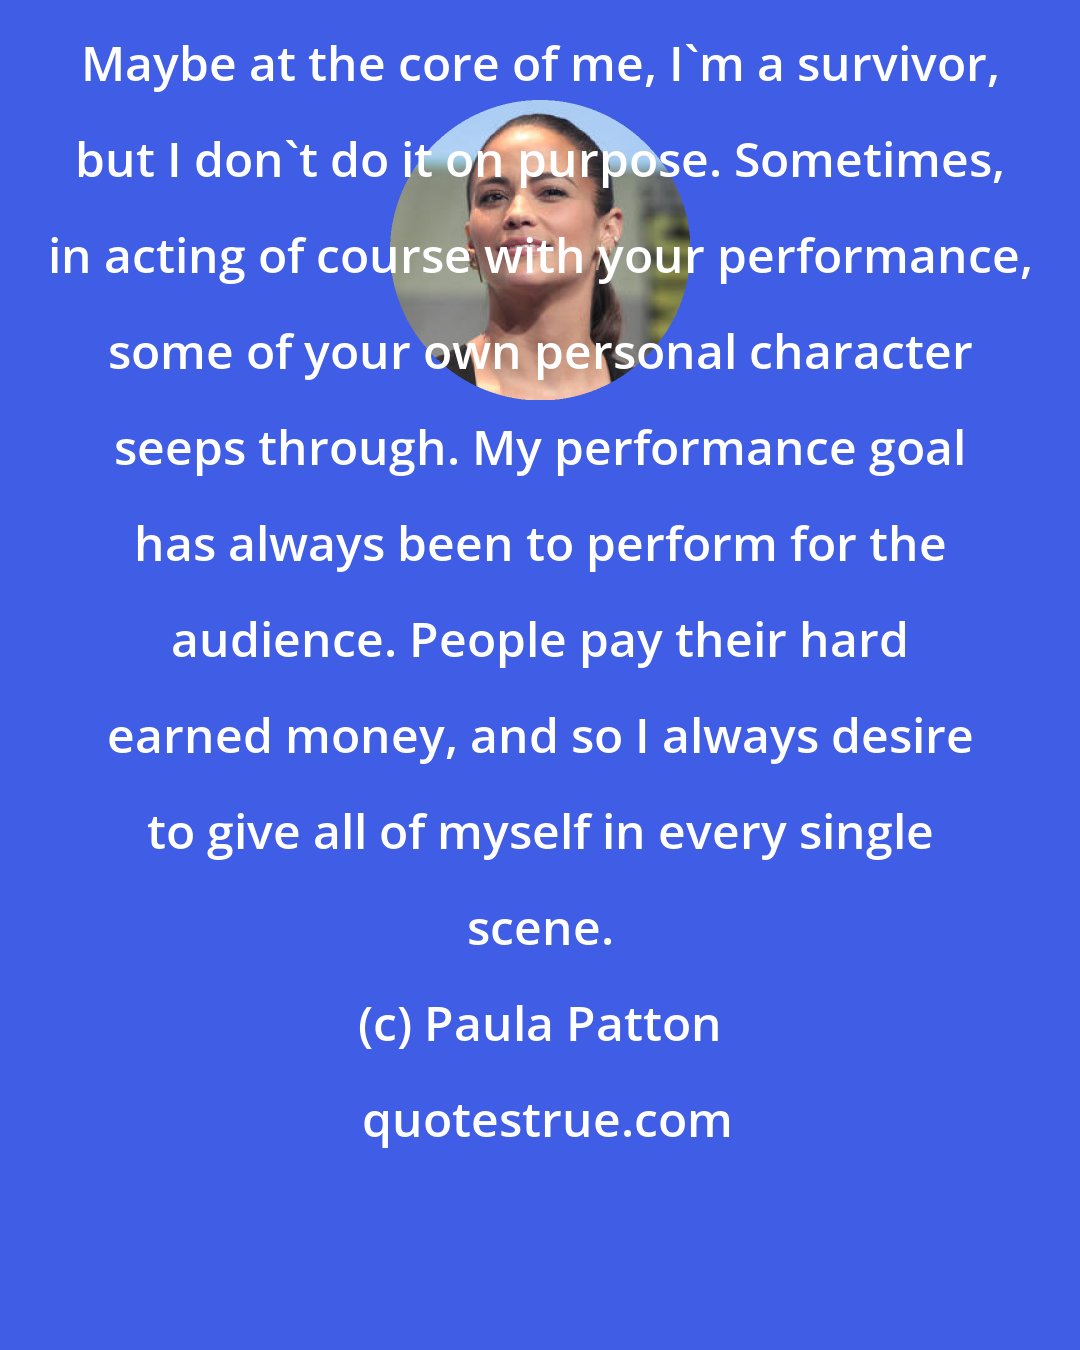 Paula Patton: Maybe at the core of me, I'm a survivor, but I don't do it on purpose. Sometimes, in acting of course with your performance, some of your own personal character seeps through. My performance goal has always been to perform for the audience. People pay their hard earned money, and so I always desire to give all of myself in every single scene.